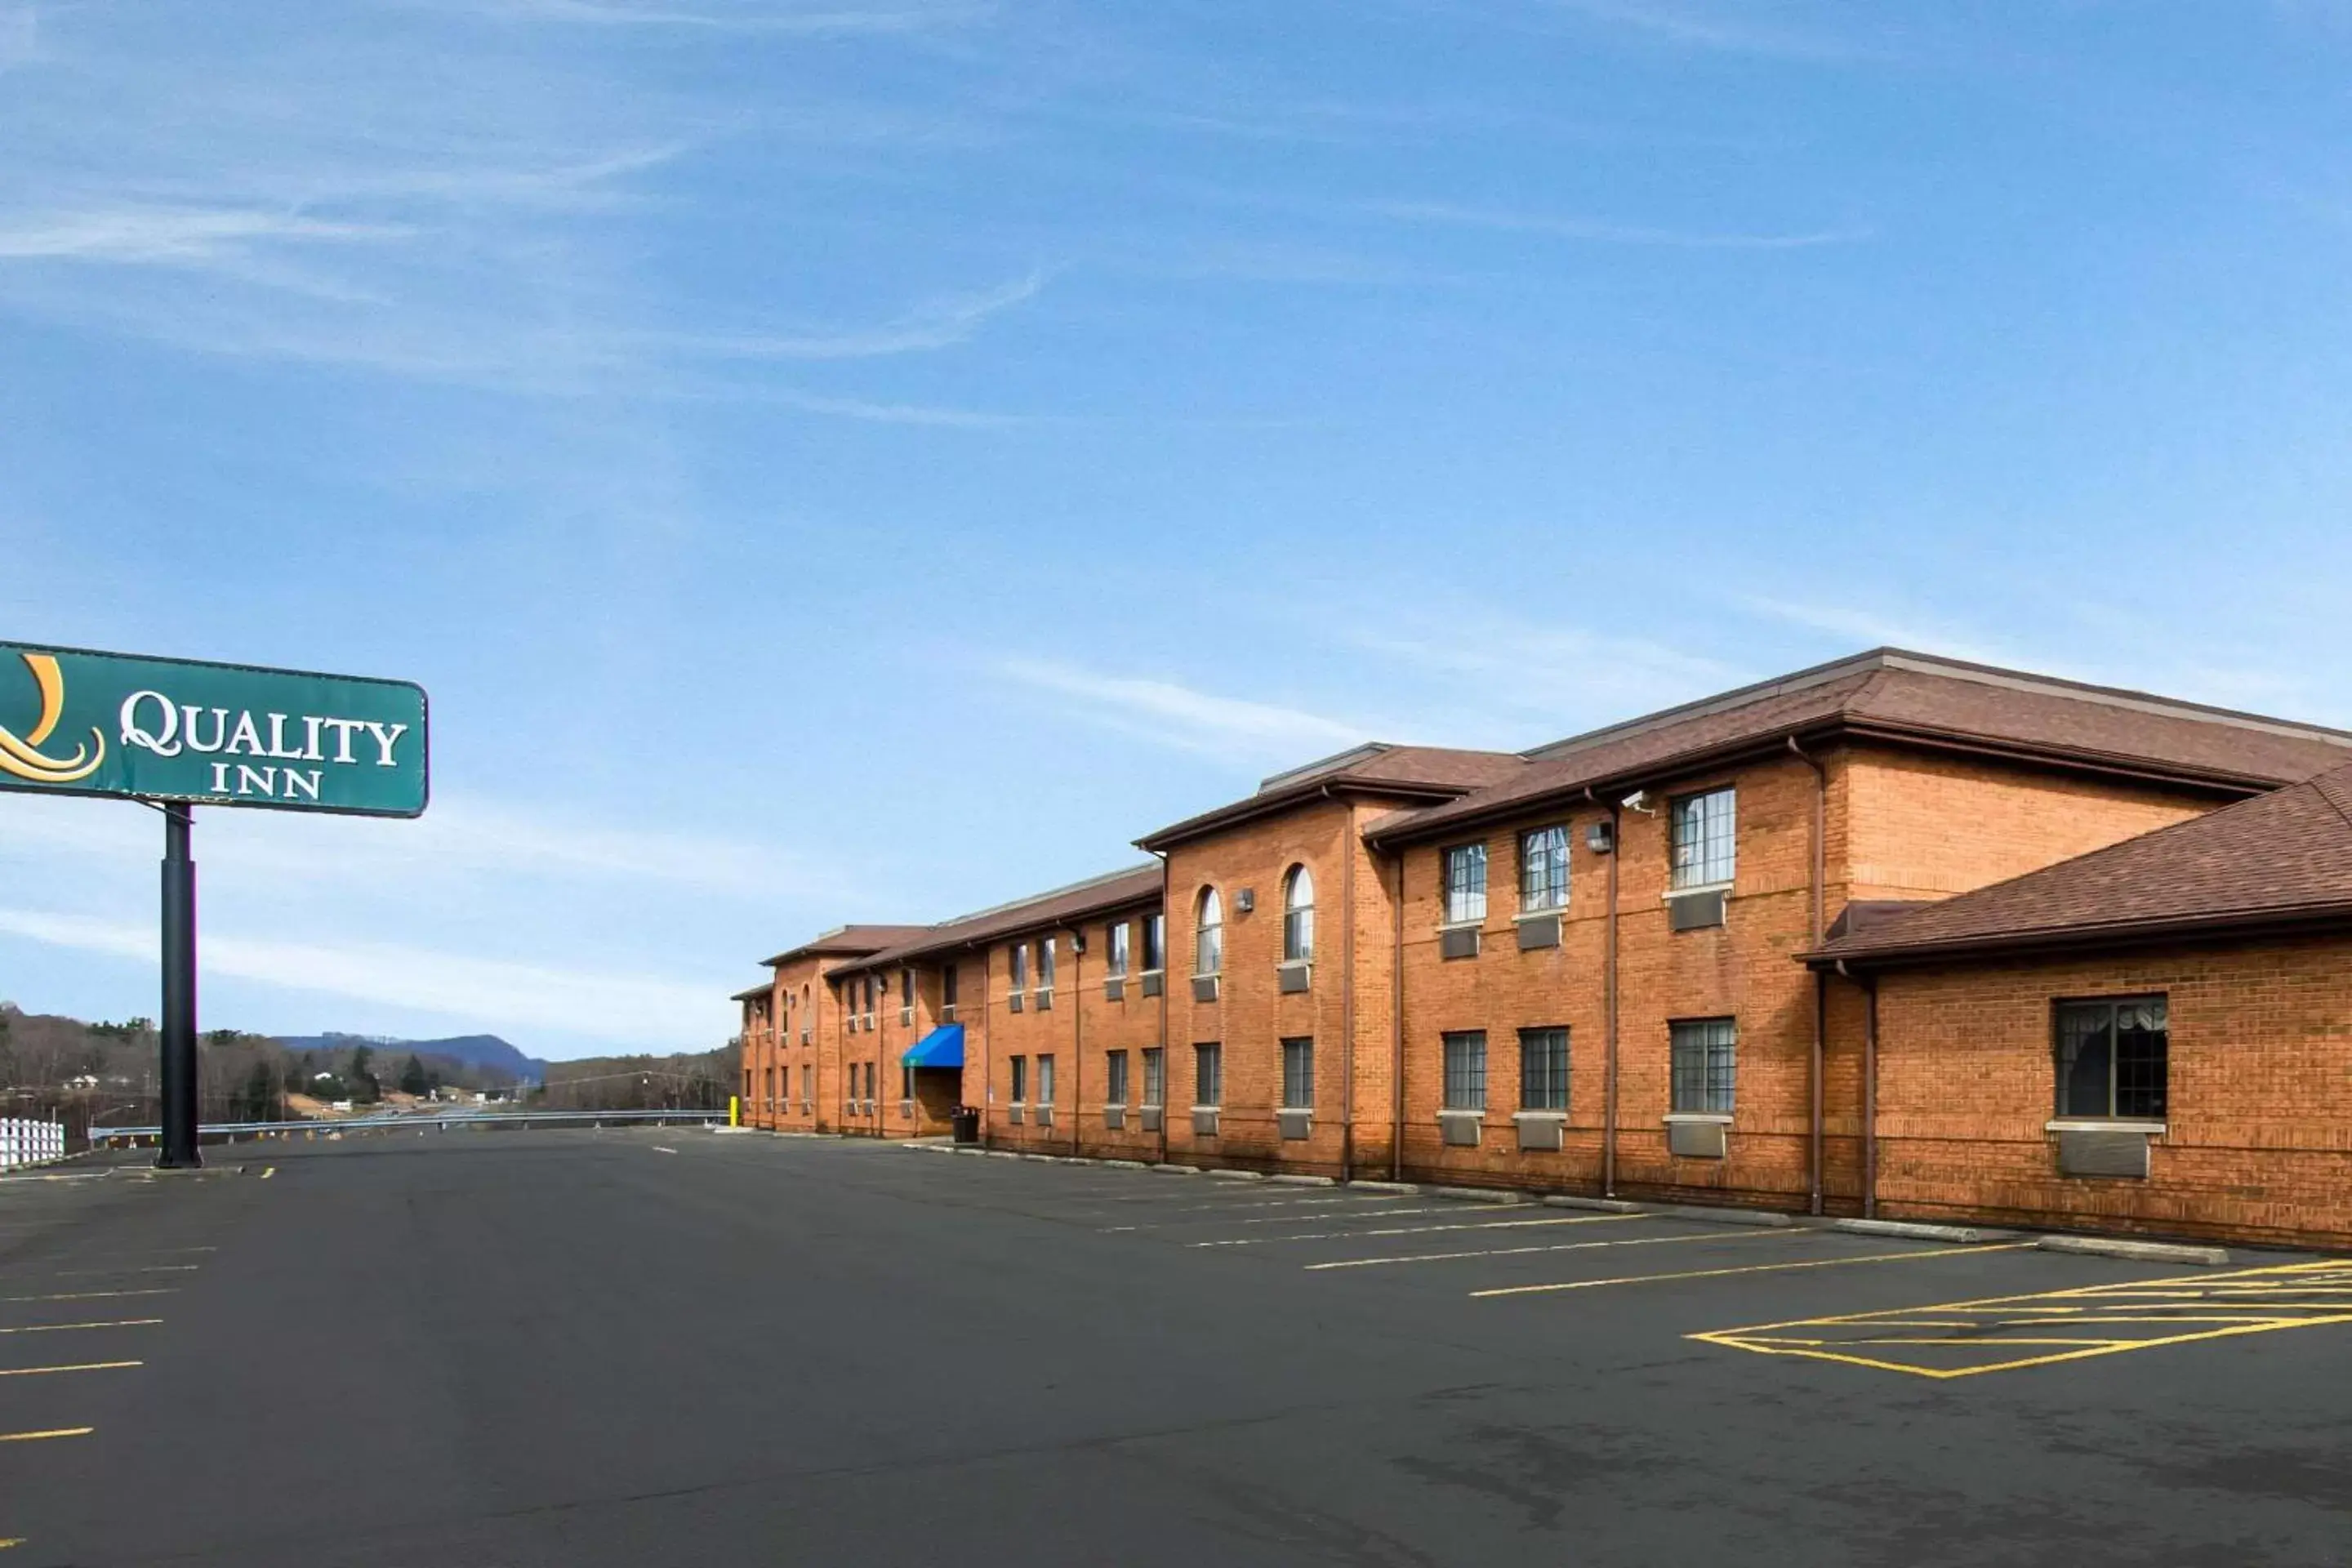 Property building in Quality Inn Summersville